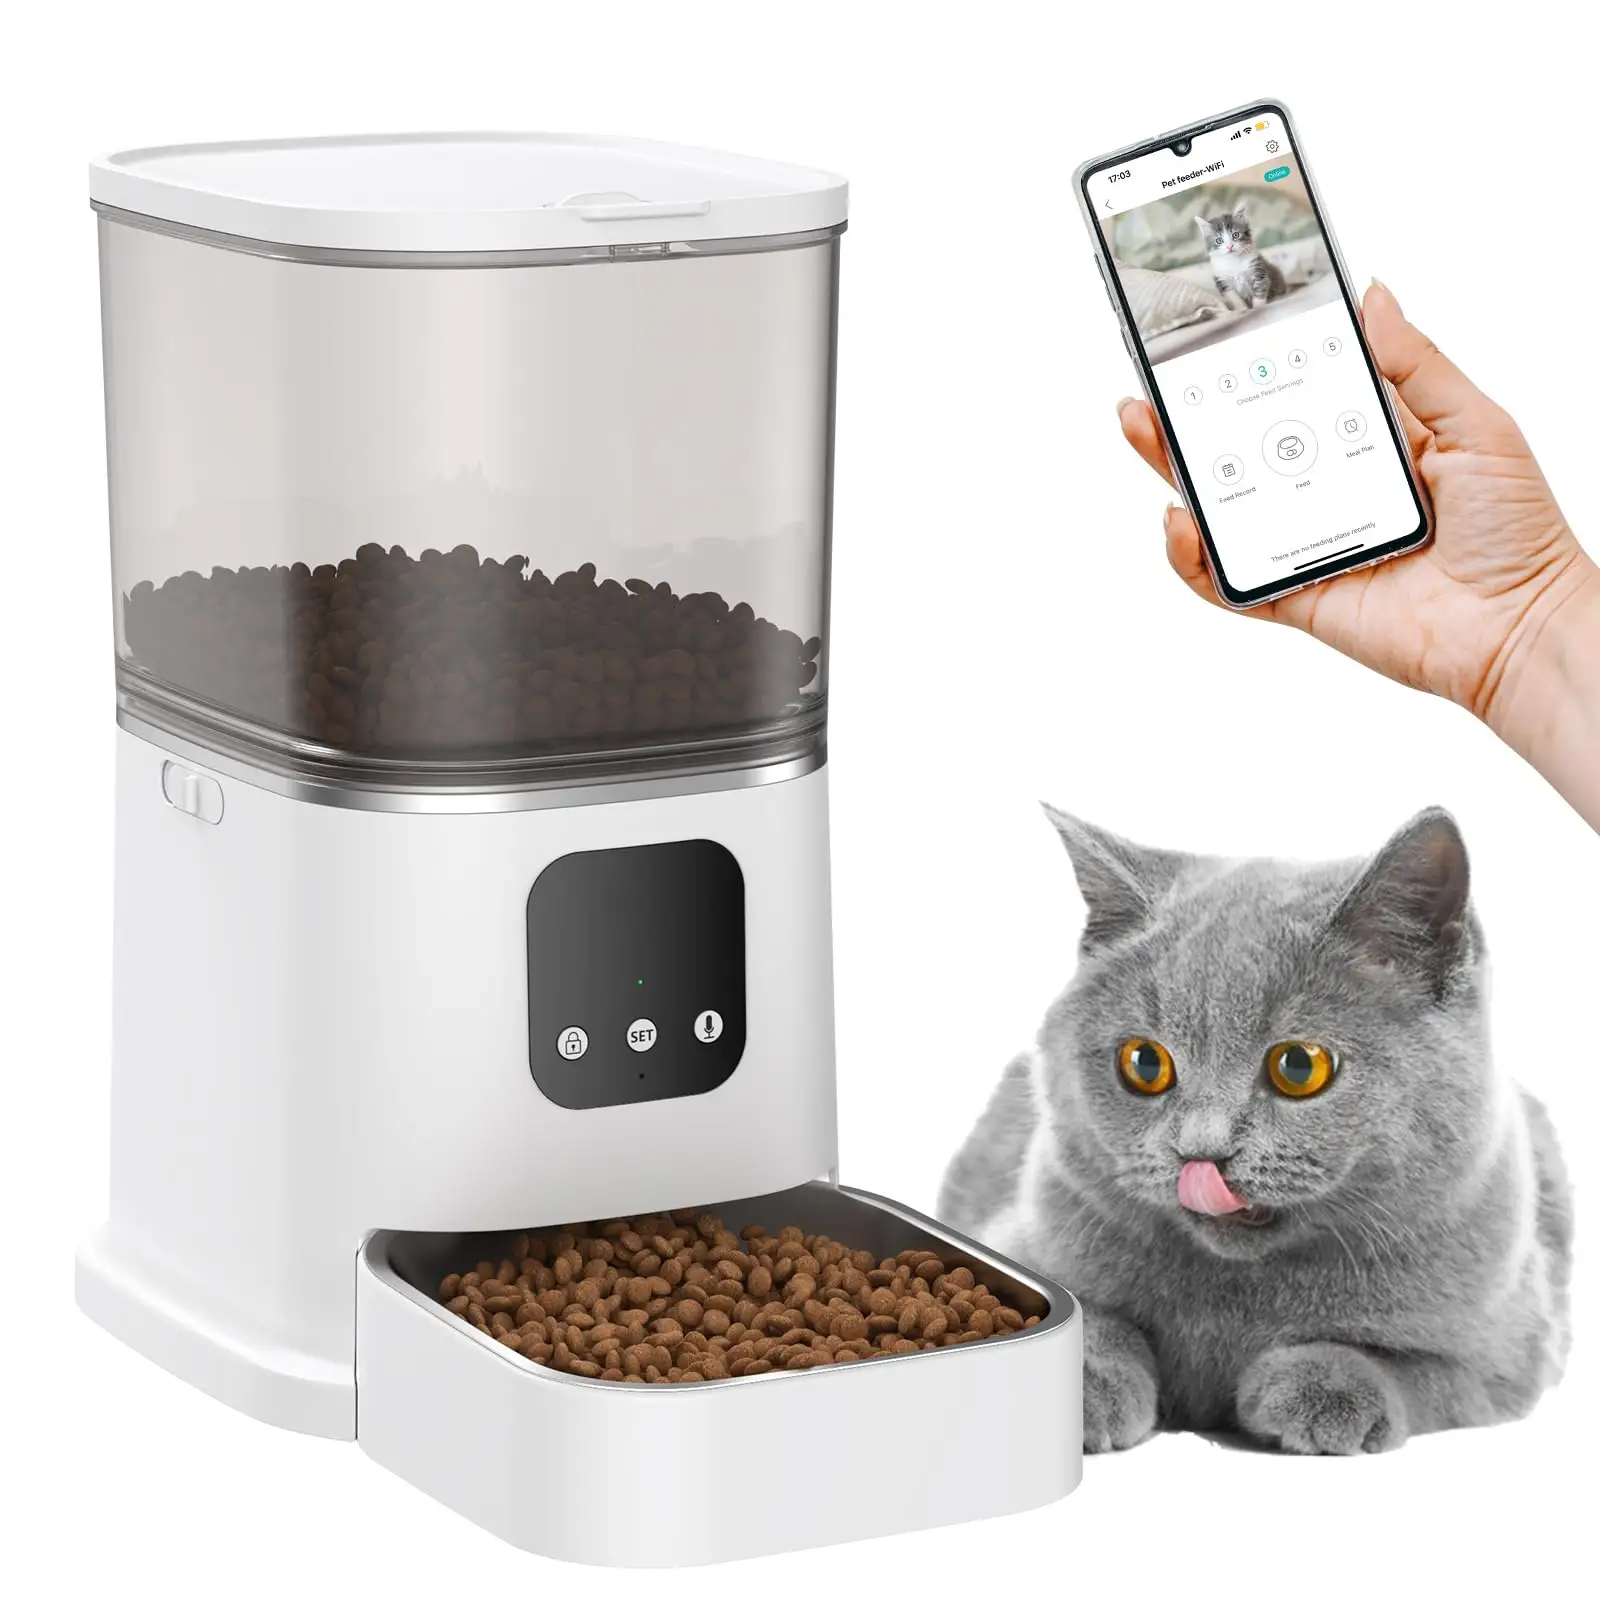 Automatic dog feeder filter drinker pet drinking with faucet video voice record for cats and d window bird